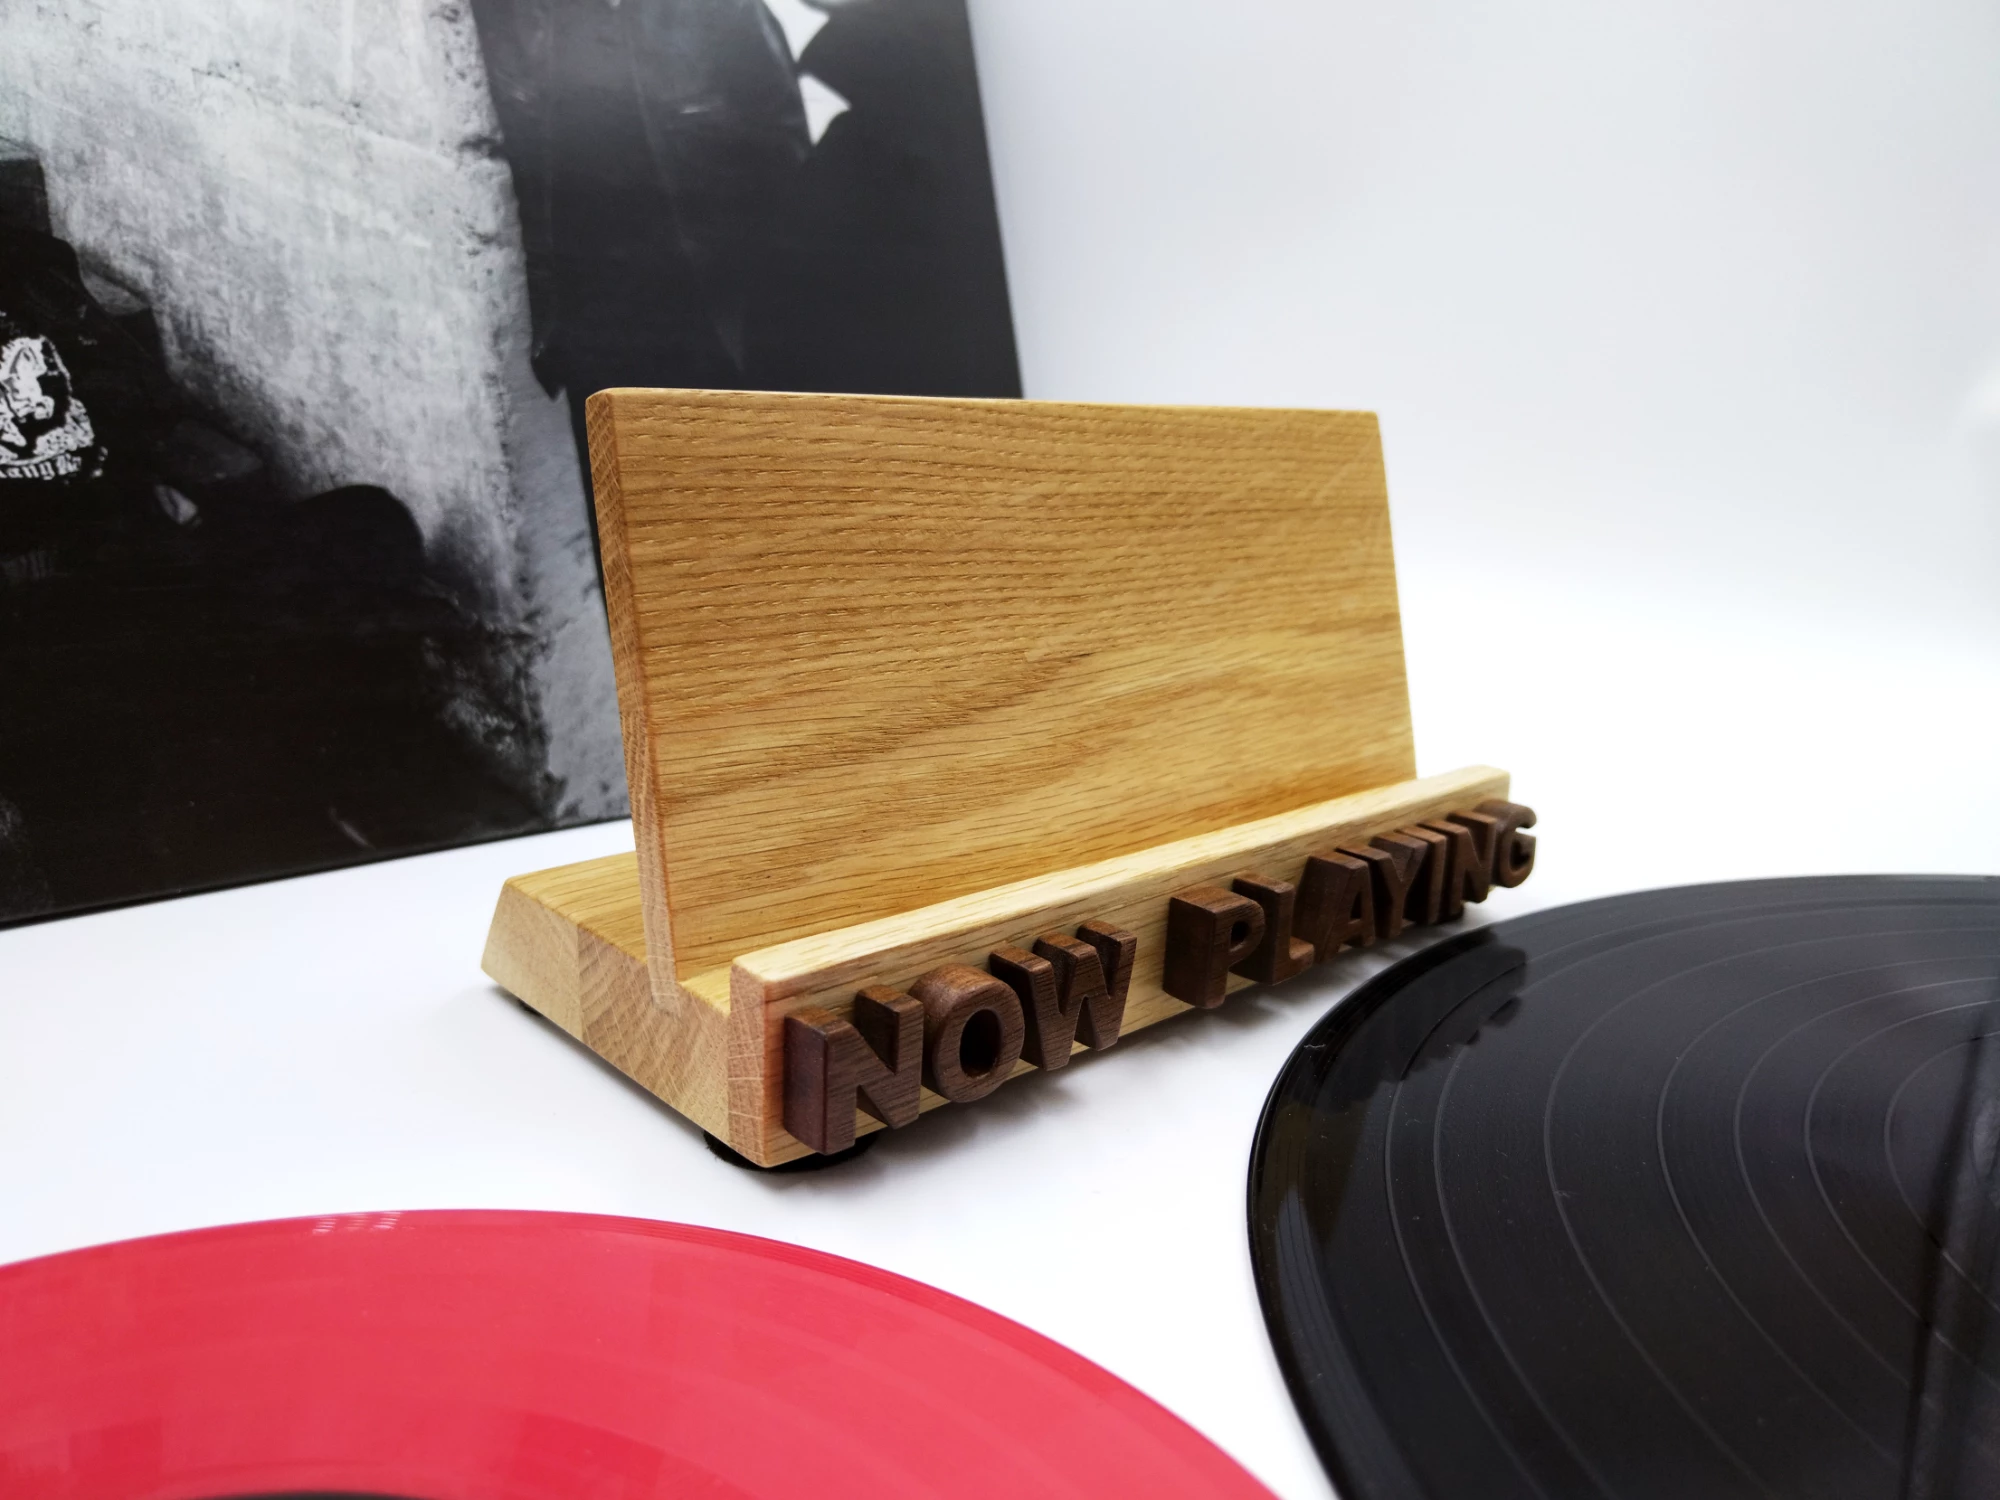 Oak & walnut NOW PLAYING vinyl record display stand